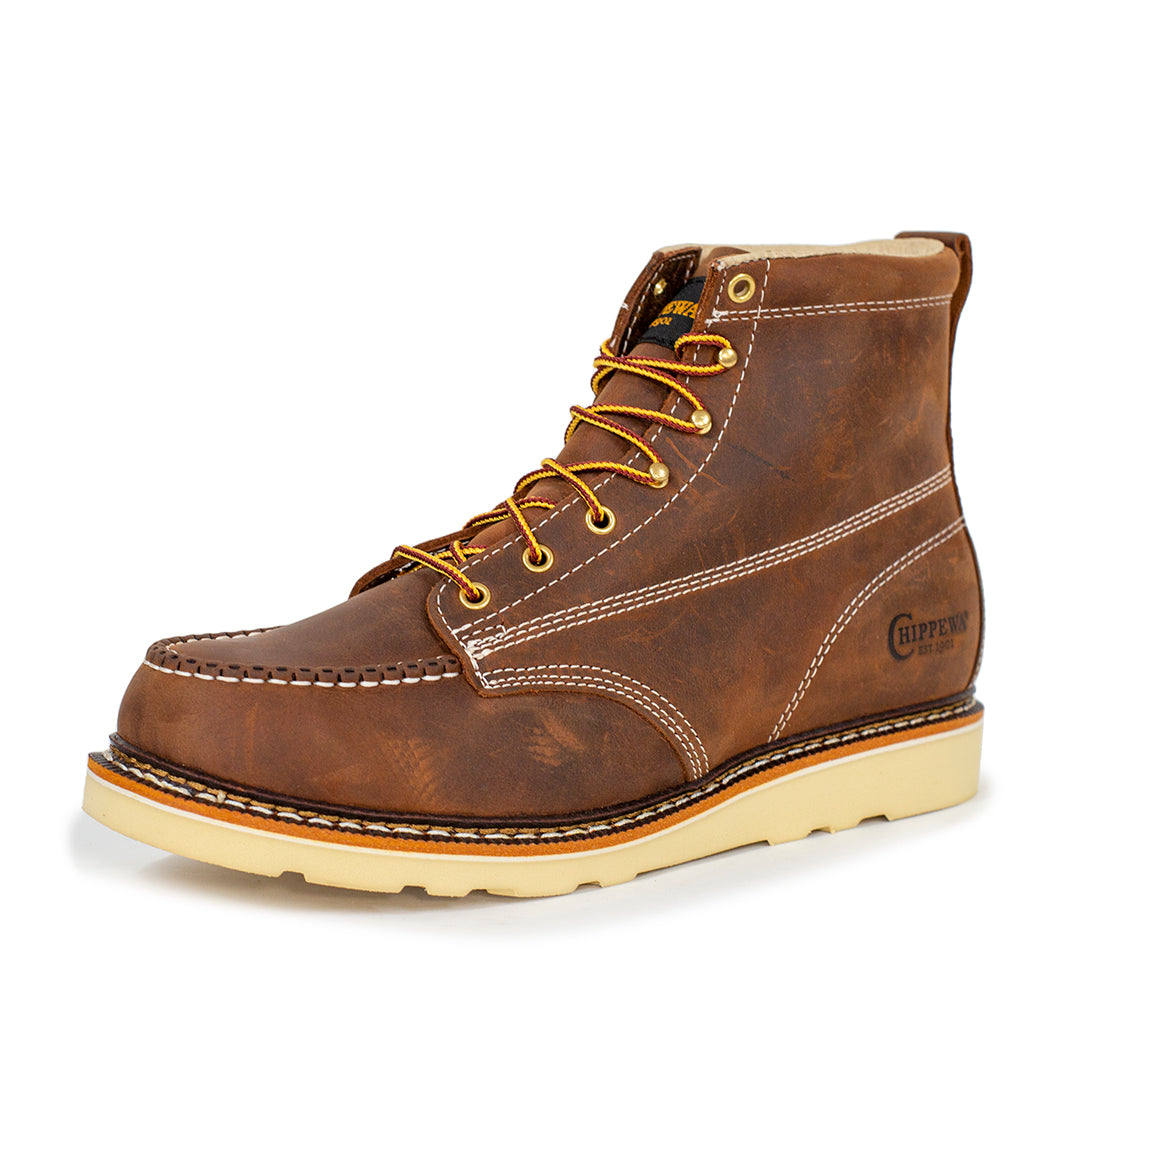 Chippewa Edge Walker 6" Boot-Footwear-Hickory Brown-8-D-Kevin's Fine Outdoor Gear & Apparel